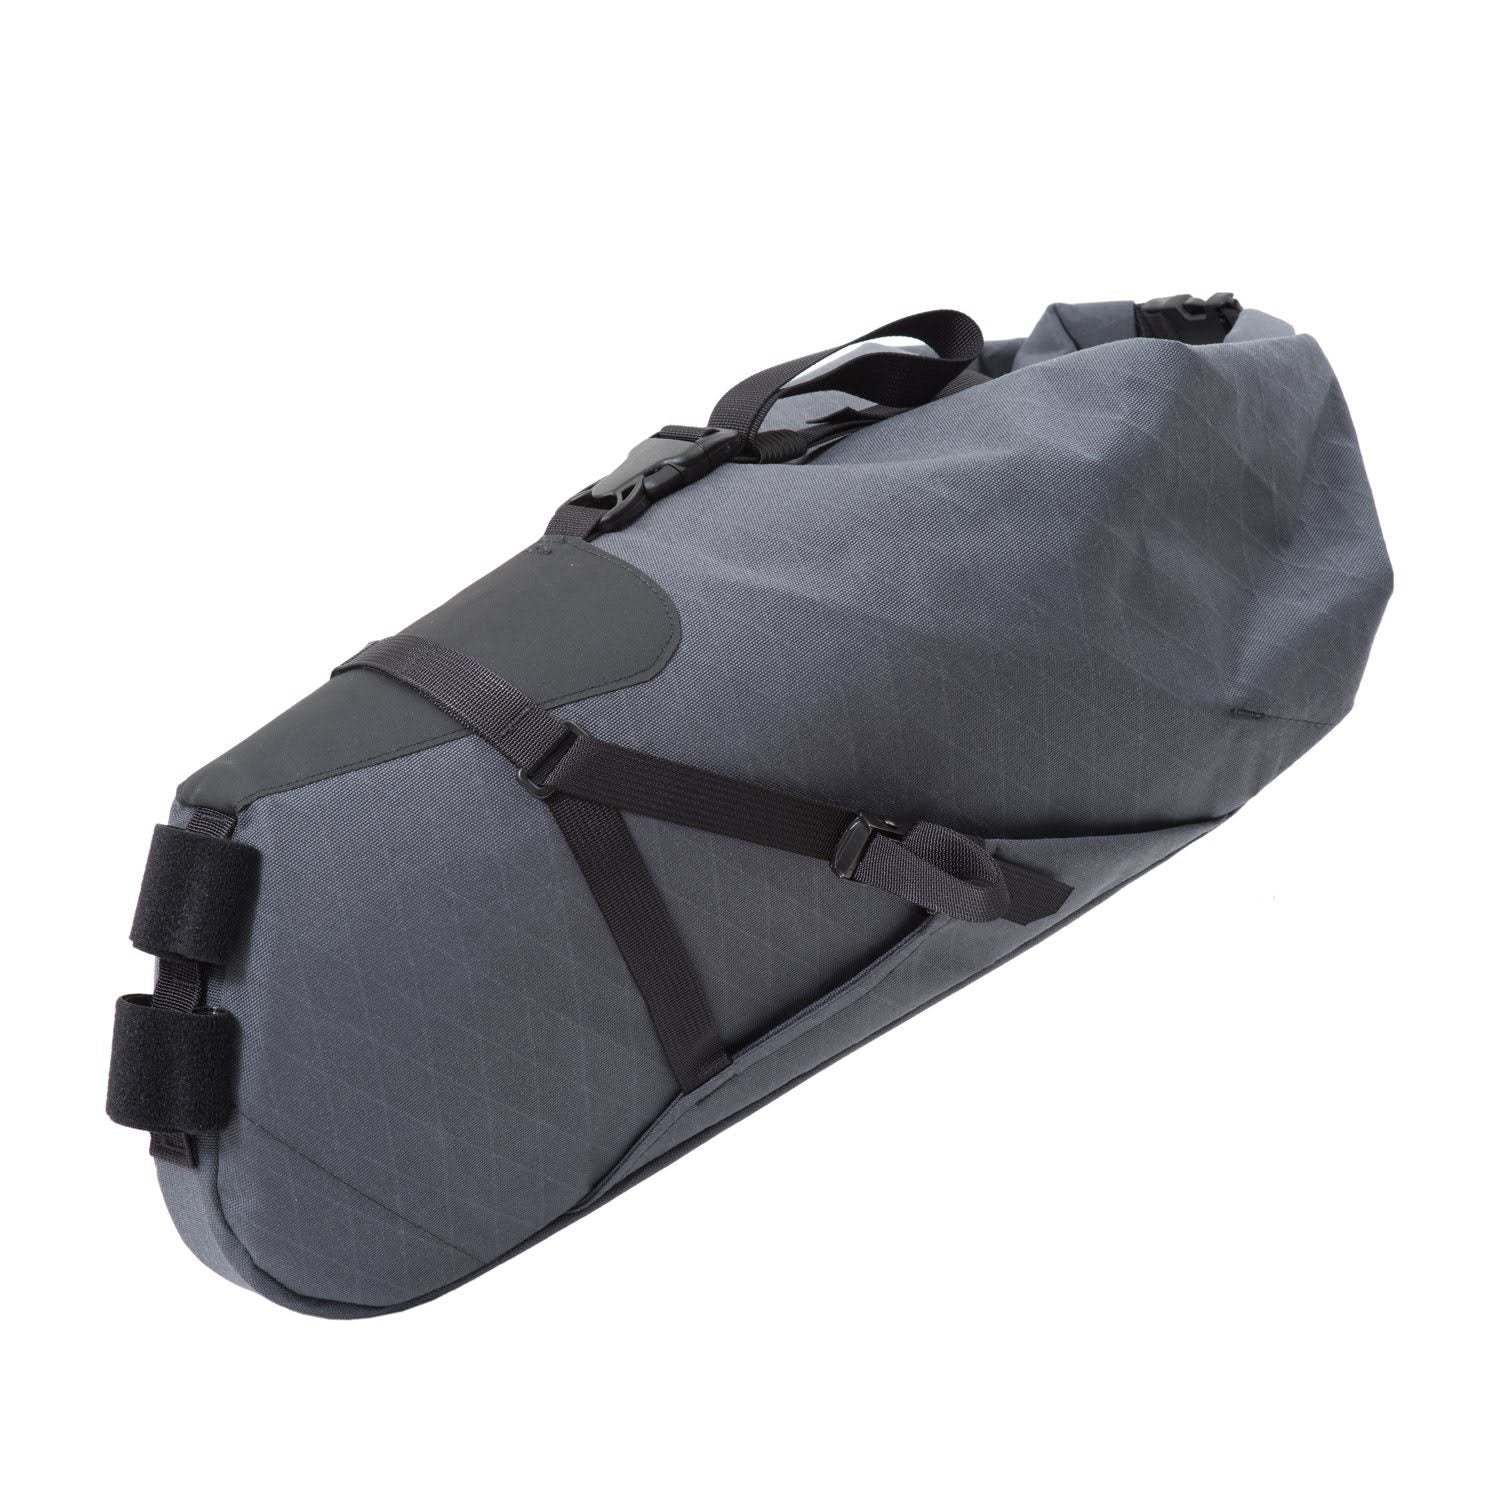 OUTER SHELL ADVENTURE Expedition Seatpack